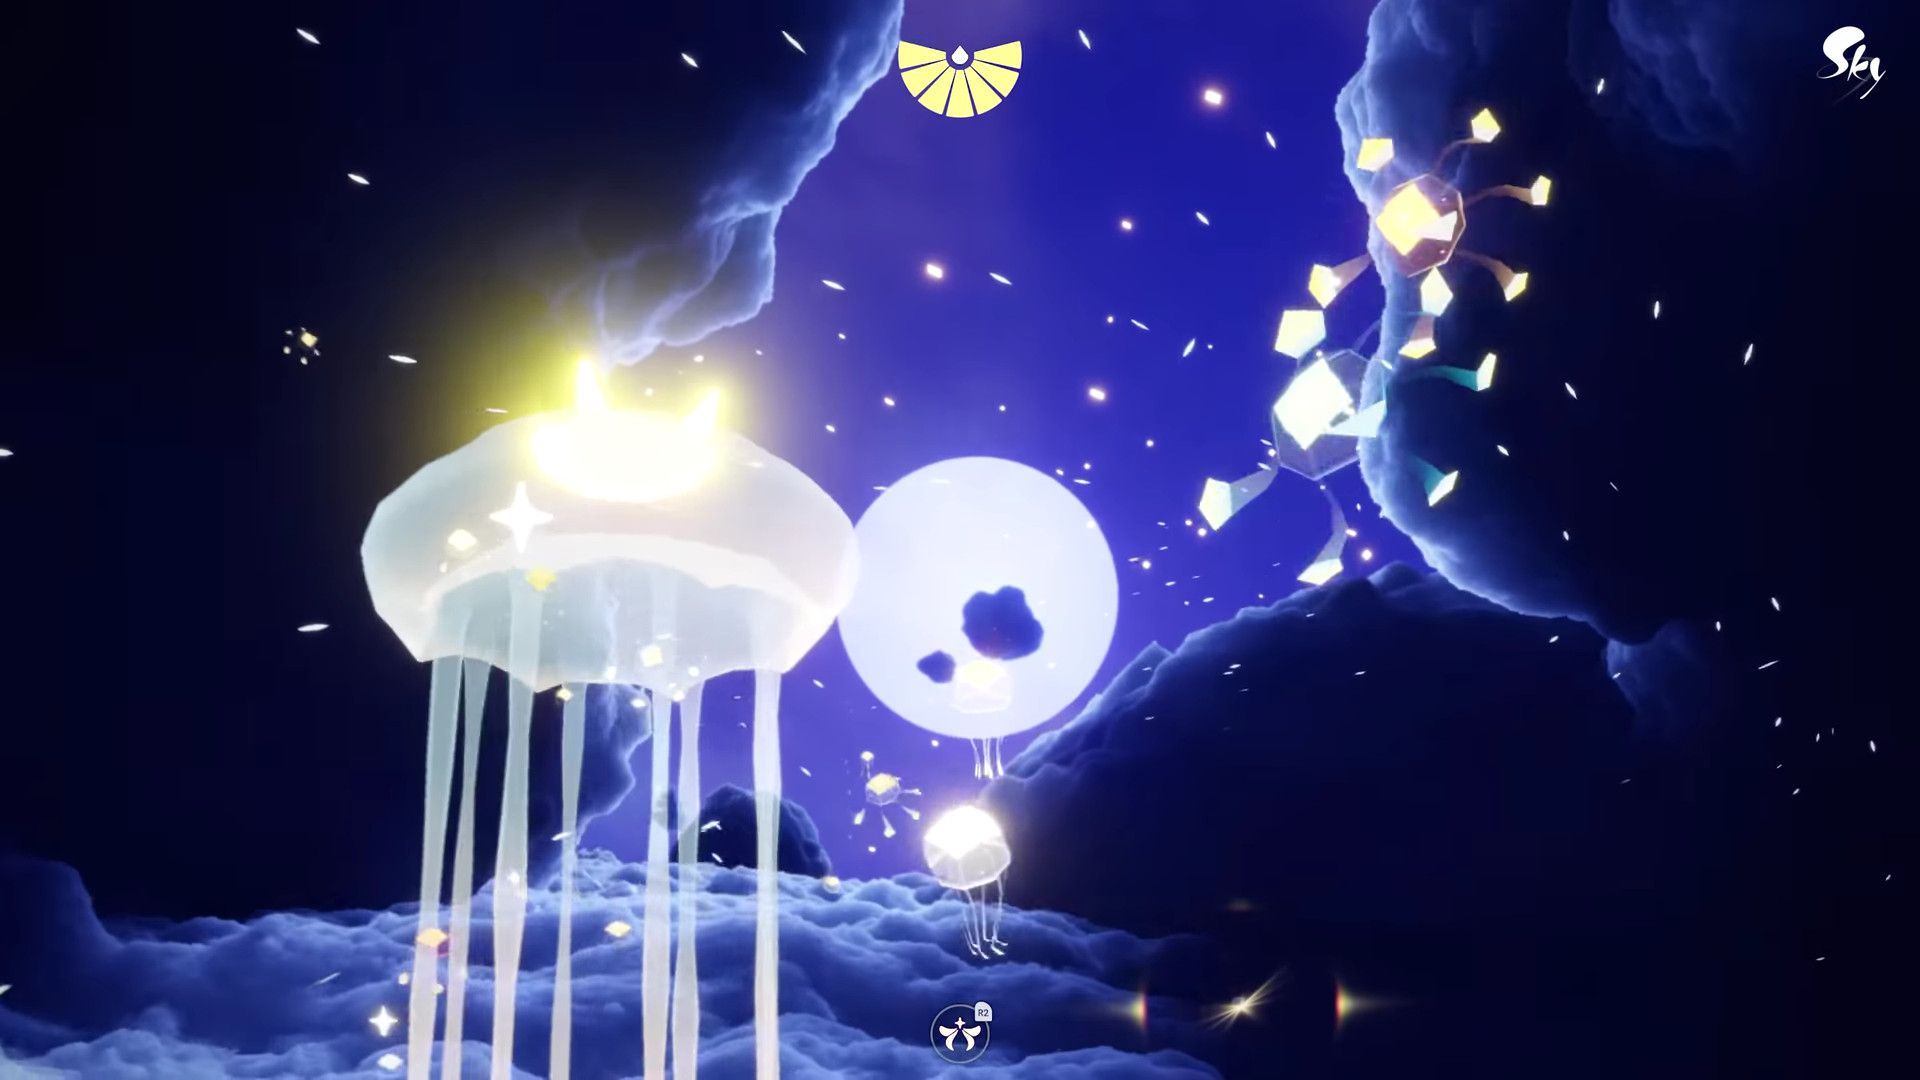 sky avatars become jellyfish and fly through a starry, moonlit night sky